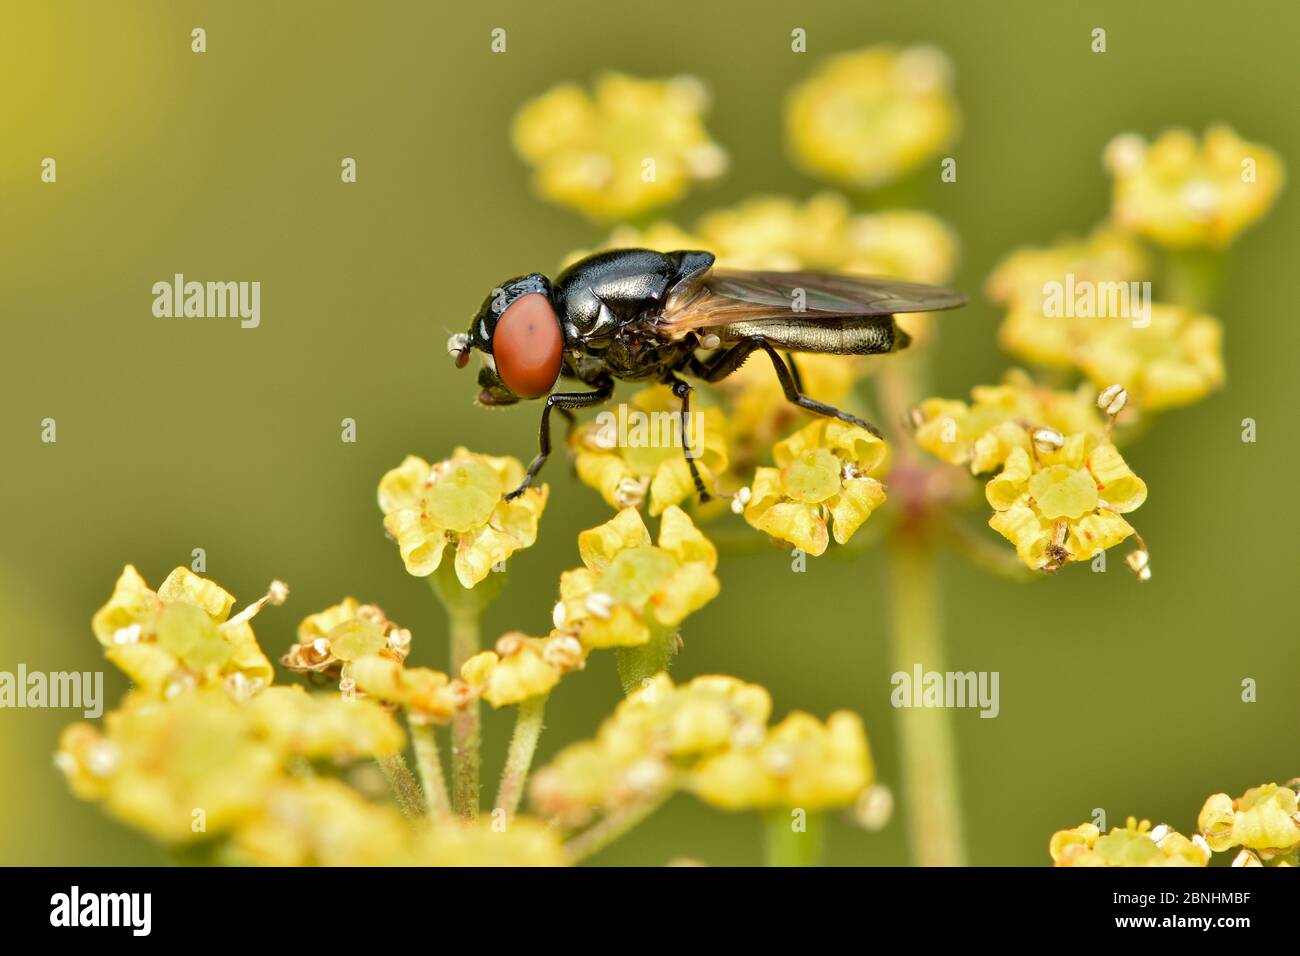 Hoverfly (Chrysogaster solstitalis) this hoverfly has extremely large eyes that are characteristic of the species, pictured on wild parsnip, Buckingha Stock Photo